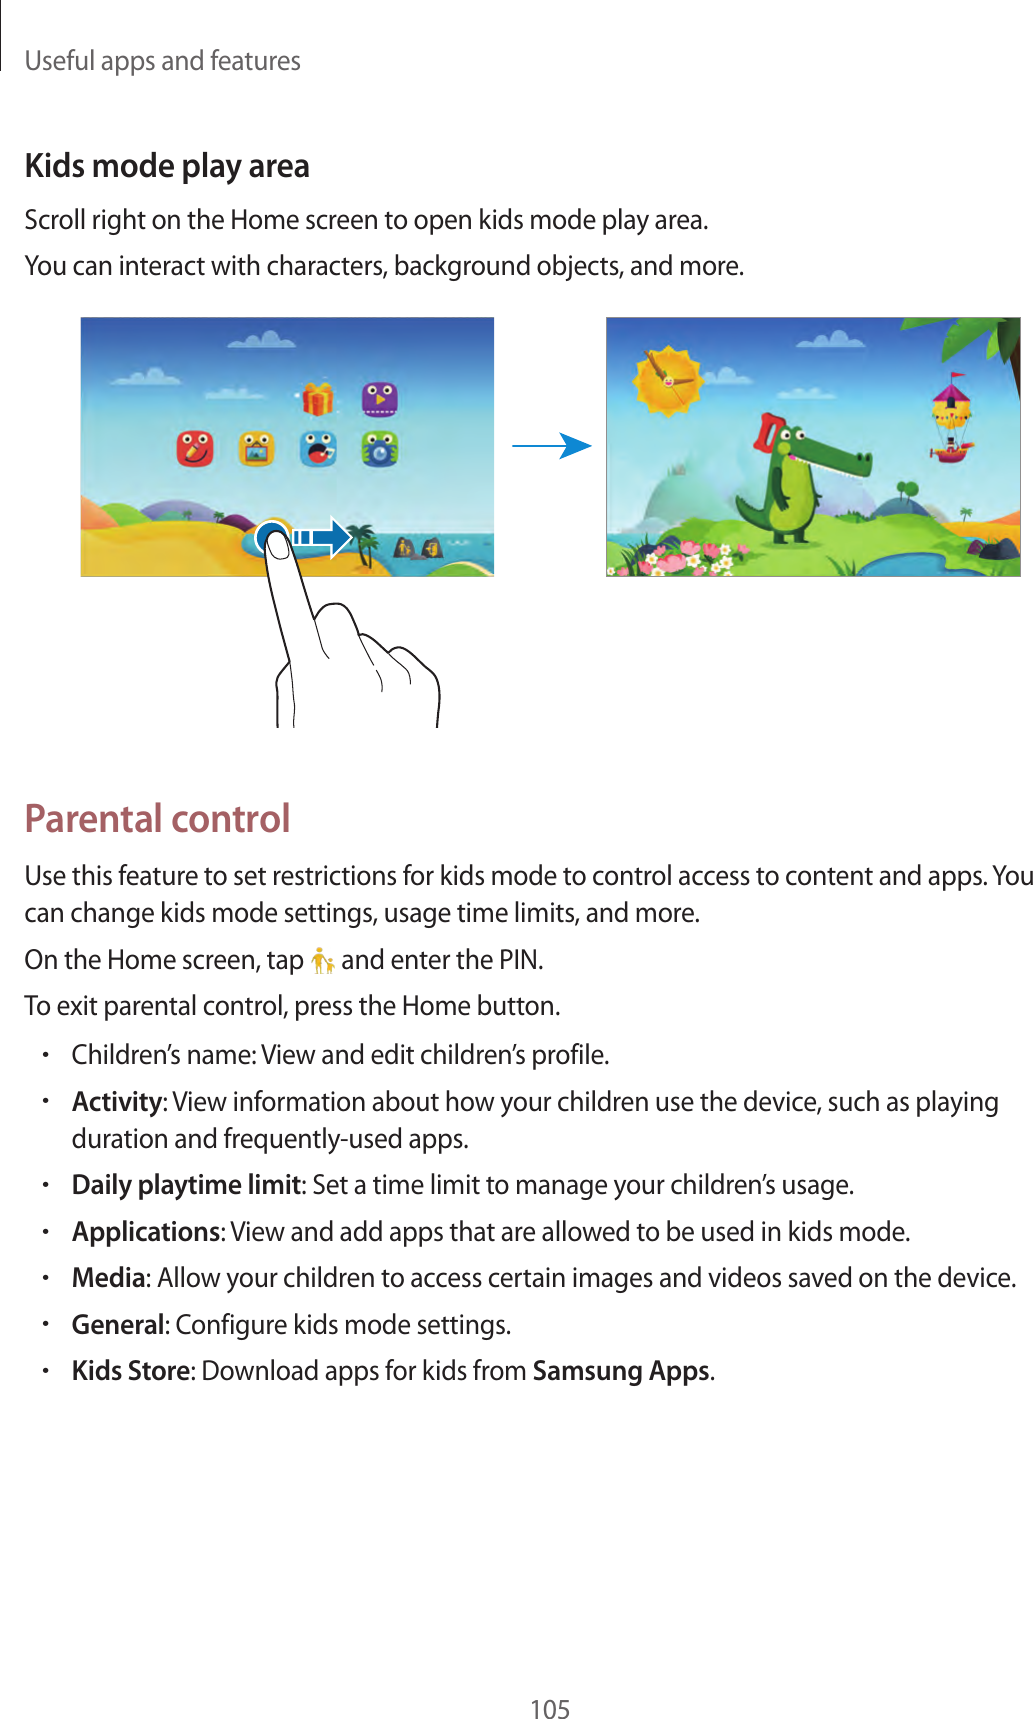 Useful apps and features105Kids mode play areaScroll right on the Home screen to open kids mode play area.You can interact with characters, background objects, and more.Parental controlUse this feature to set restrictions for kids mode to control access to content and apps. You can change kids mode settings, usage time limits, and more.On the Home screen, tap   and enter the PIN.To exit parental control, press the Home button.•Children’s name: View and edit children’s profile.•Activity: View information about how your children use the device, such as playing duration and frequently-used apps.•Daily playtime limit: Set a time limit to manage your children’s usage.•Applications: View and add apps that are allowed to be used in kids mode.•Media: Allow your children to access certain images and videos saved on the device.•General: Configure kids mode settings.•Kids Store: Download apps for kids from Samsung Apps.